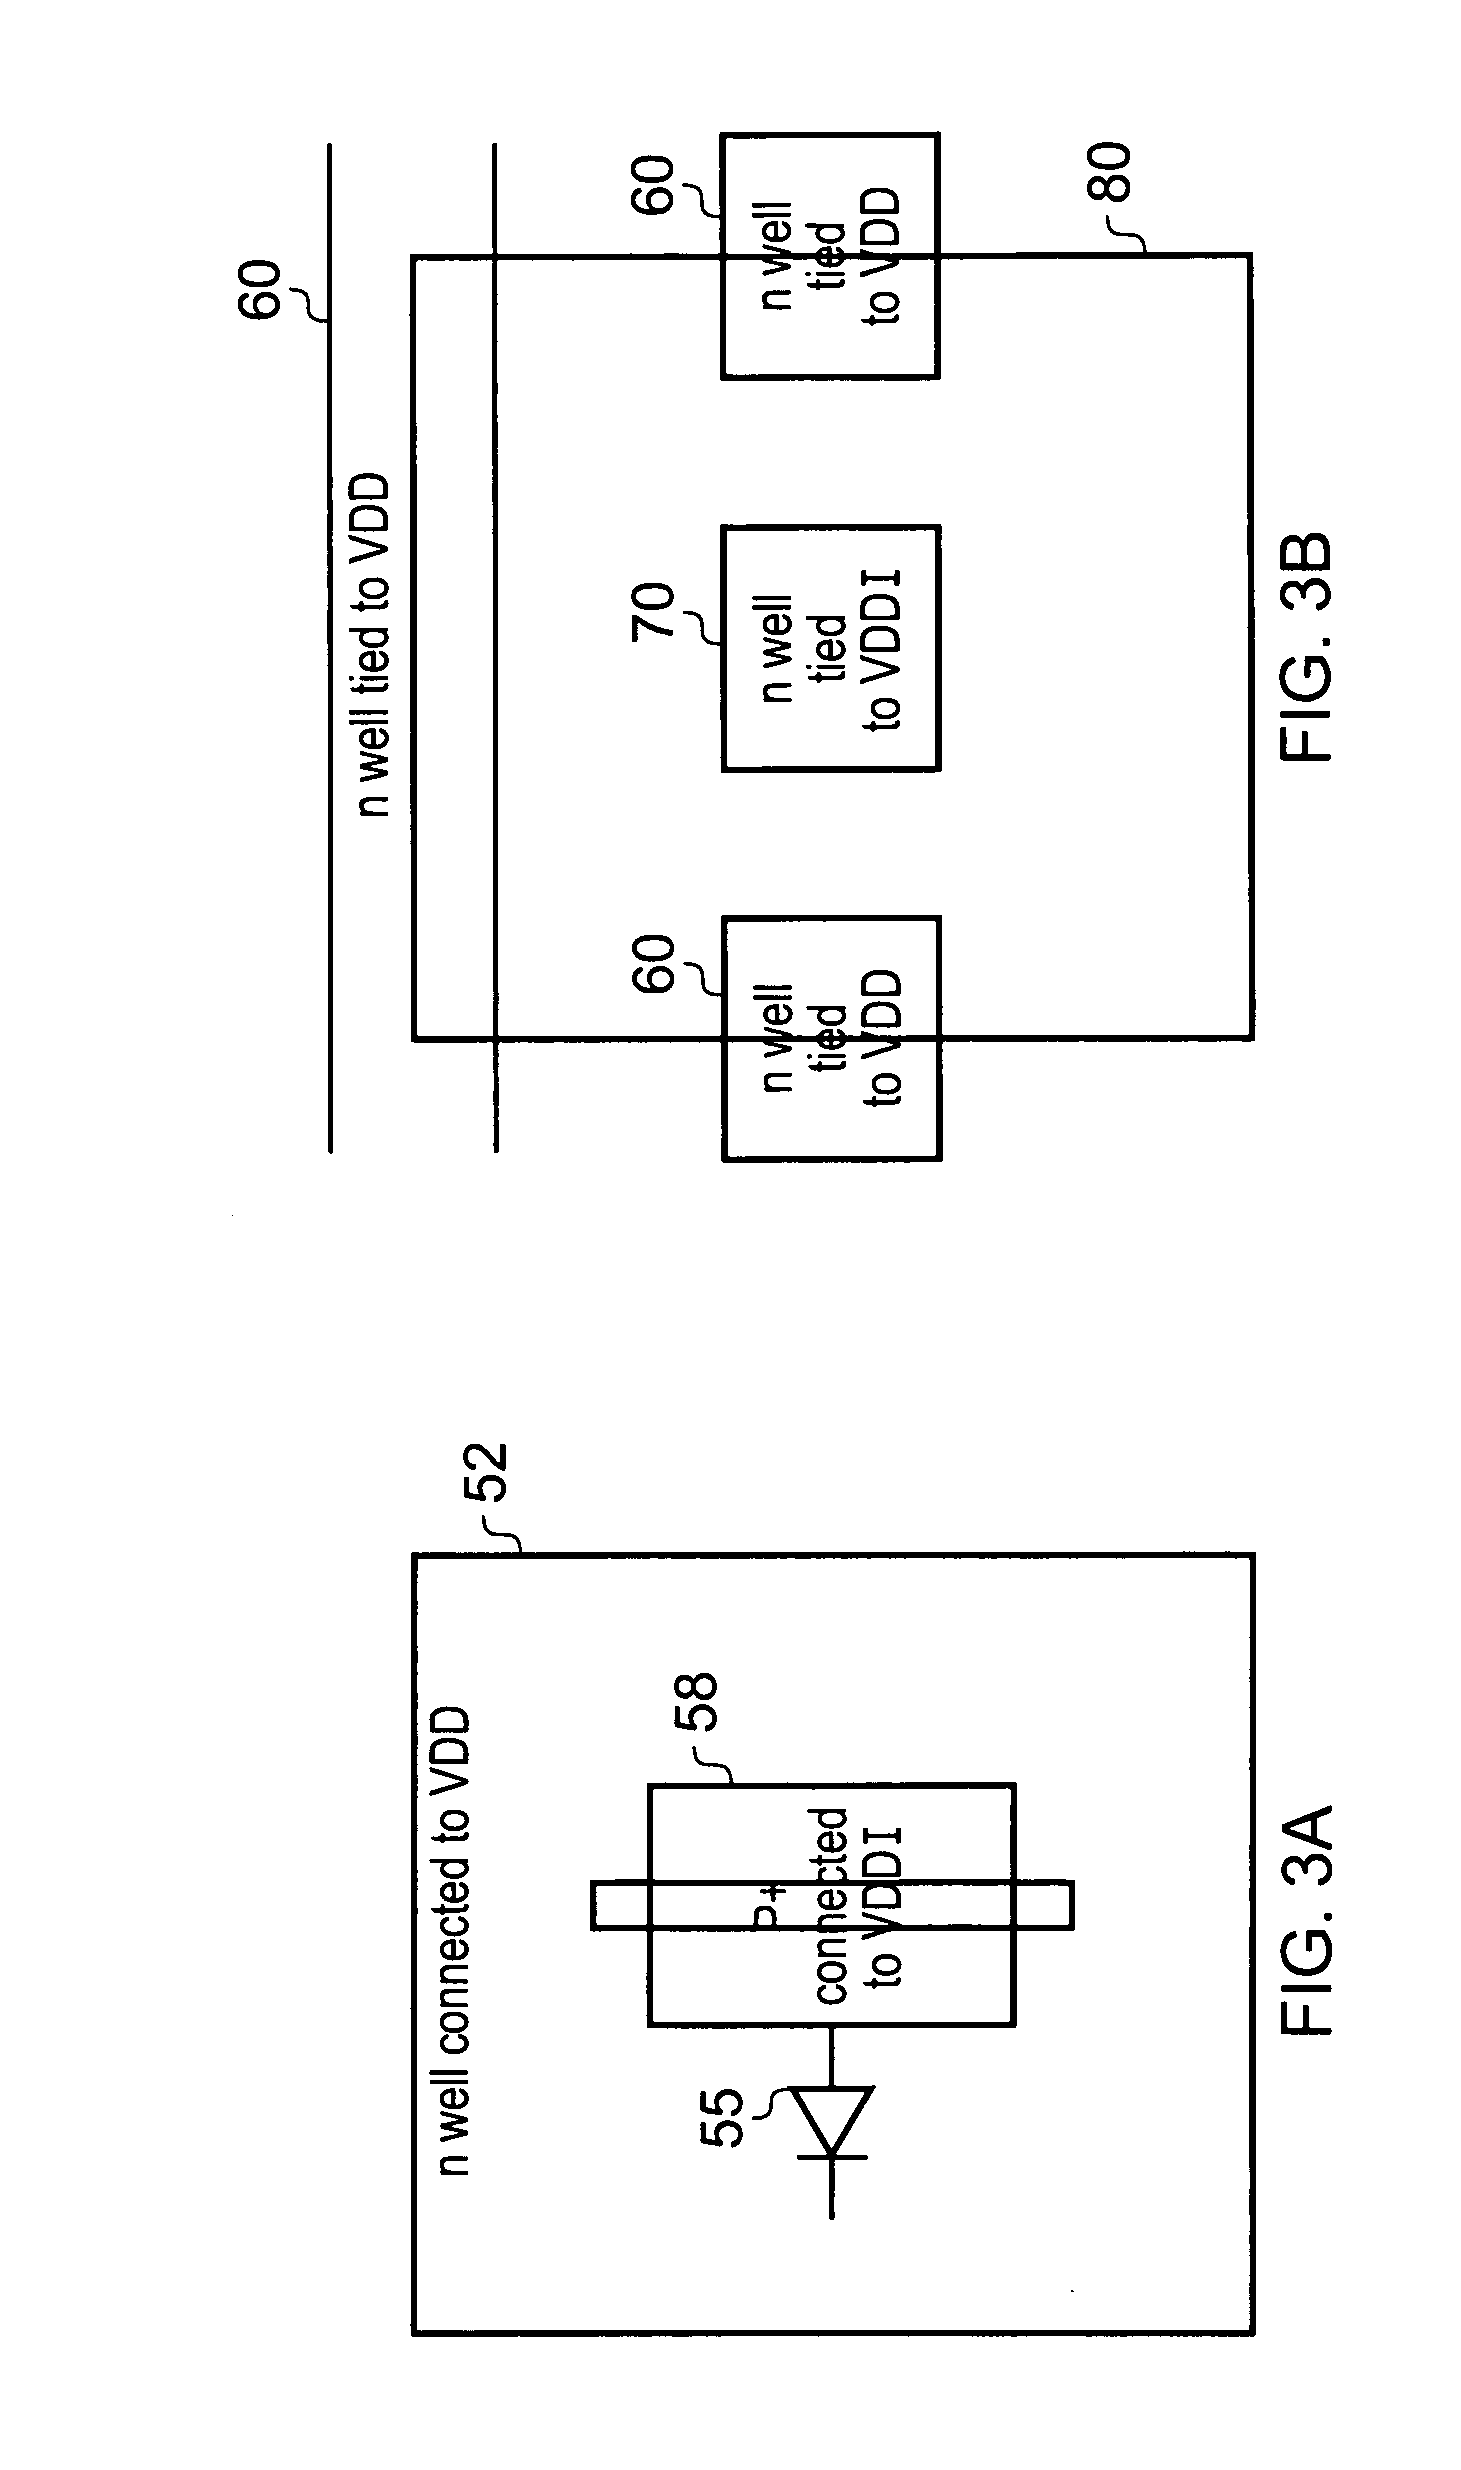 Shifting of a voltage level between different voltage level domains